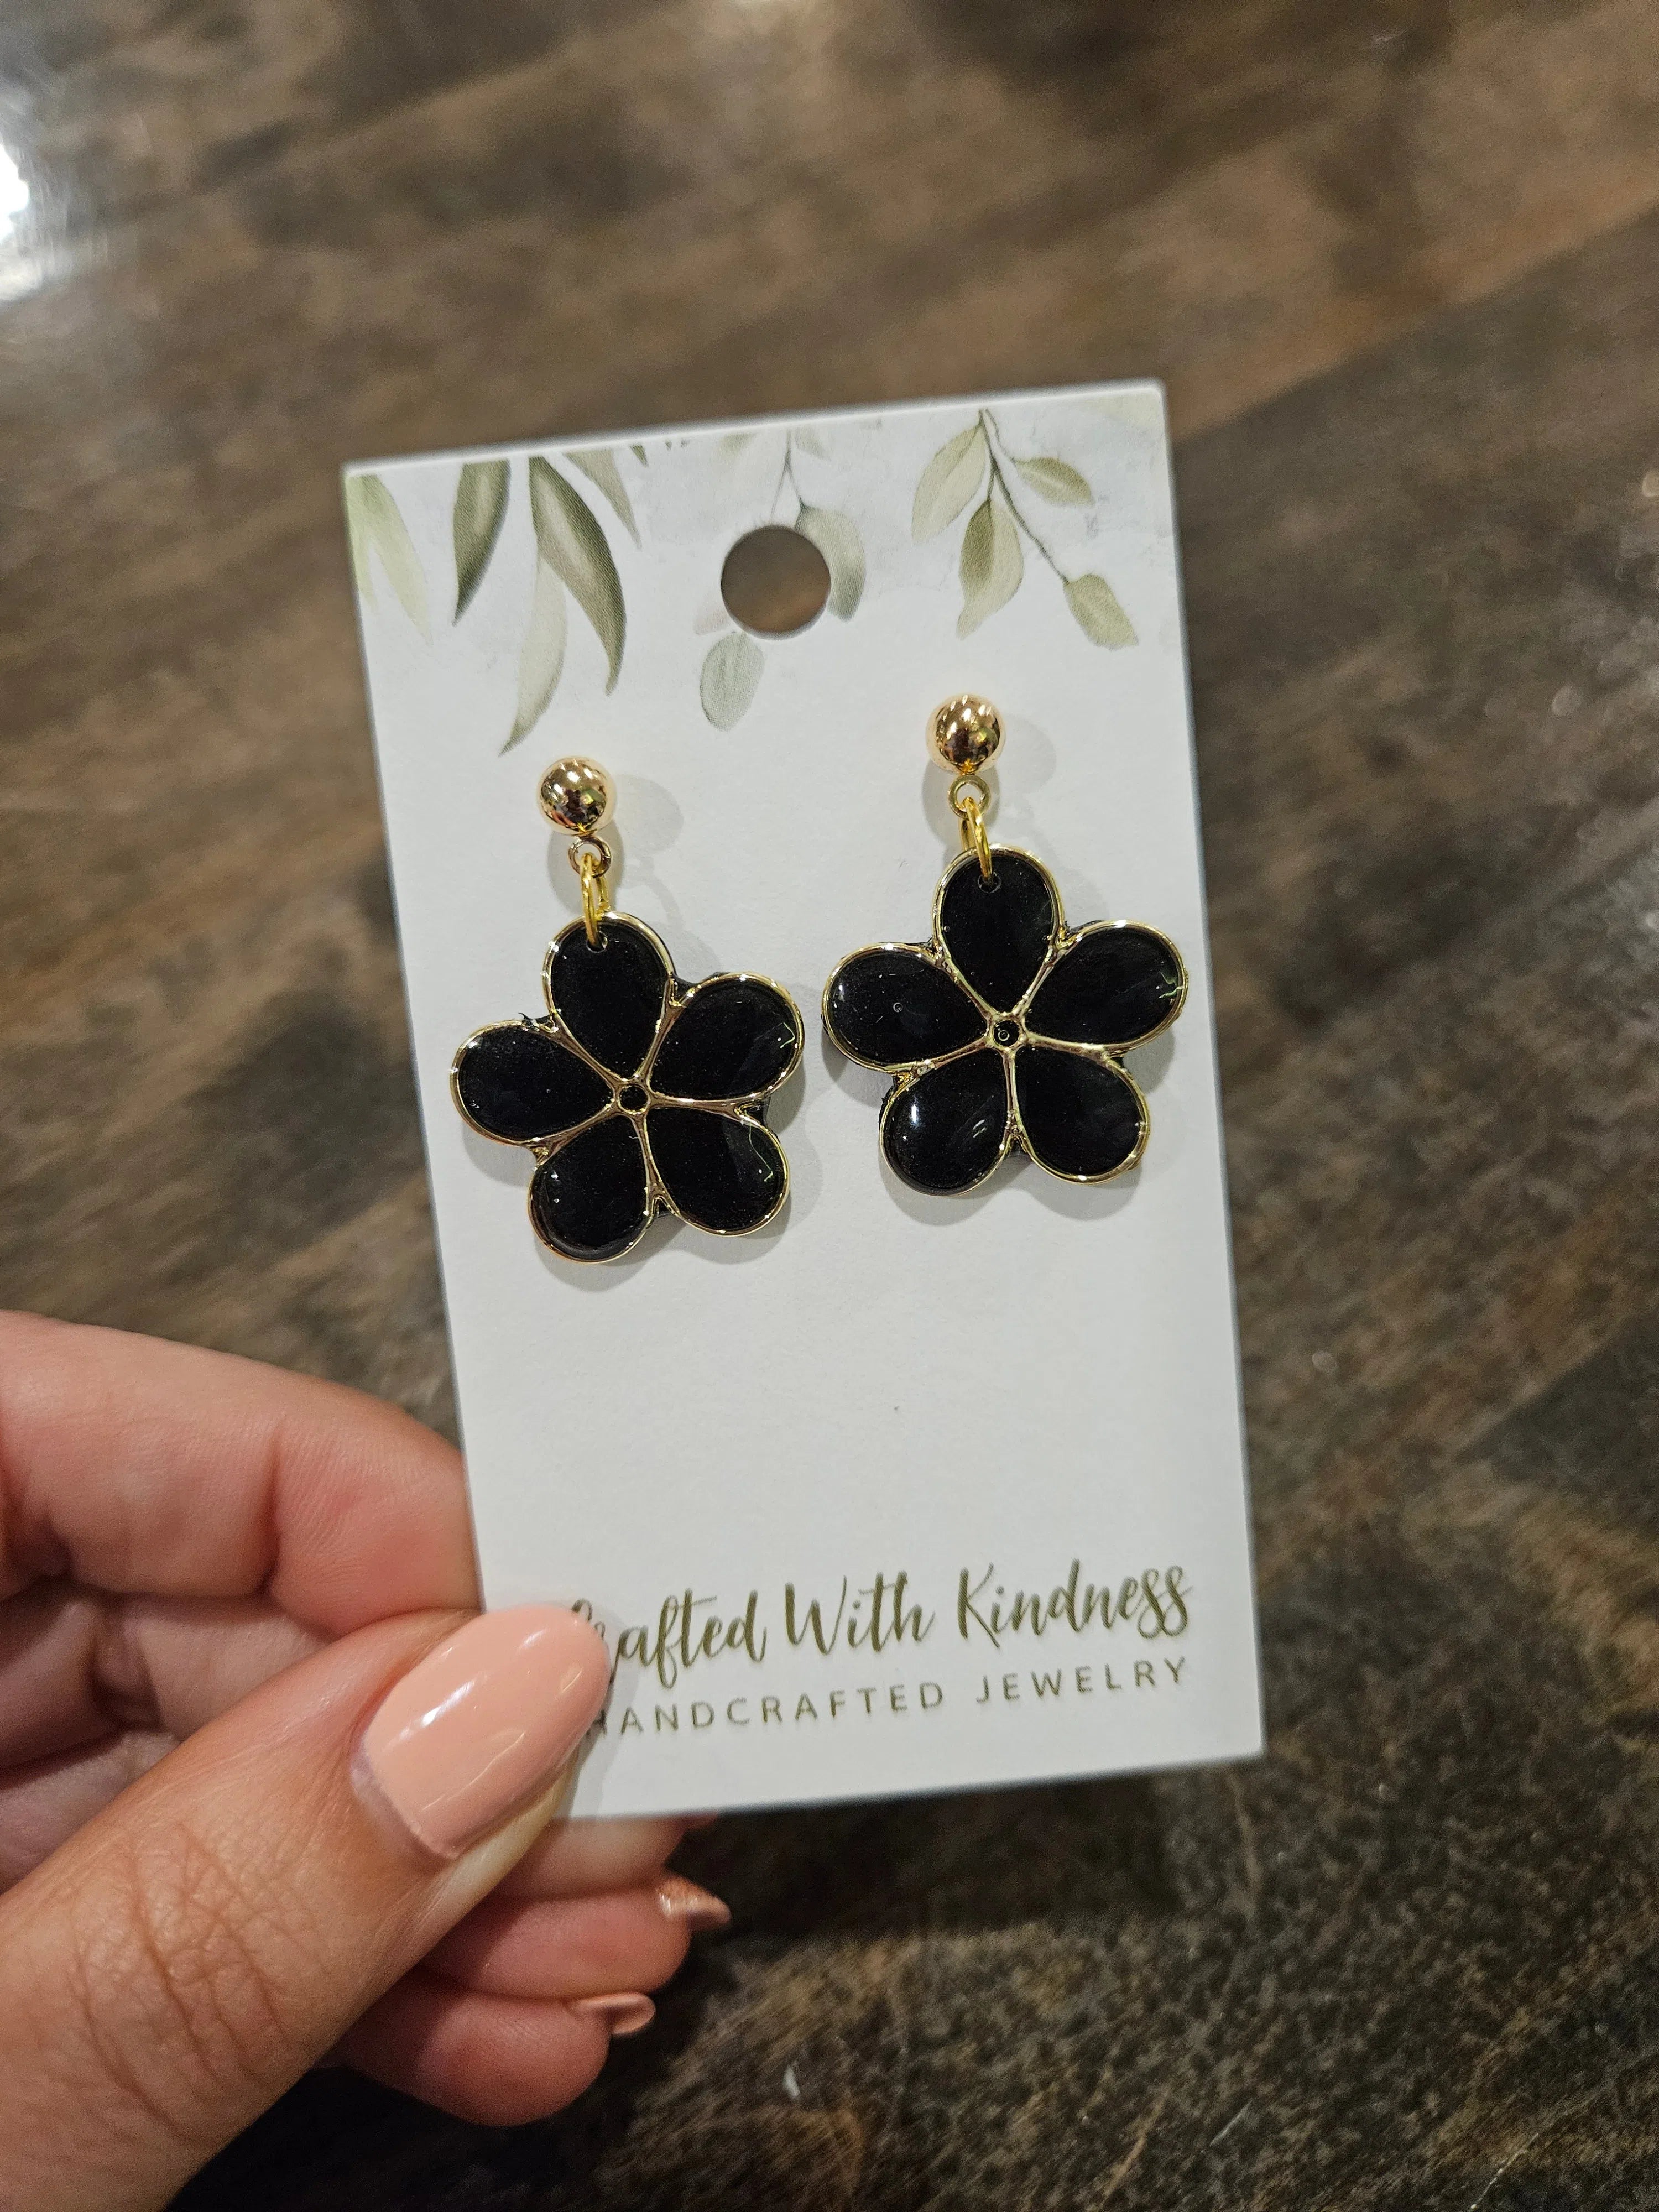 Shop Mod Floral Earrings with Gold Accents-Earrings at Ruby Joy Boutique, a Women's Clothing Store in Pickerington, Ohio